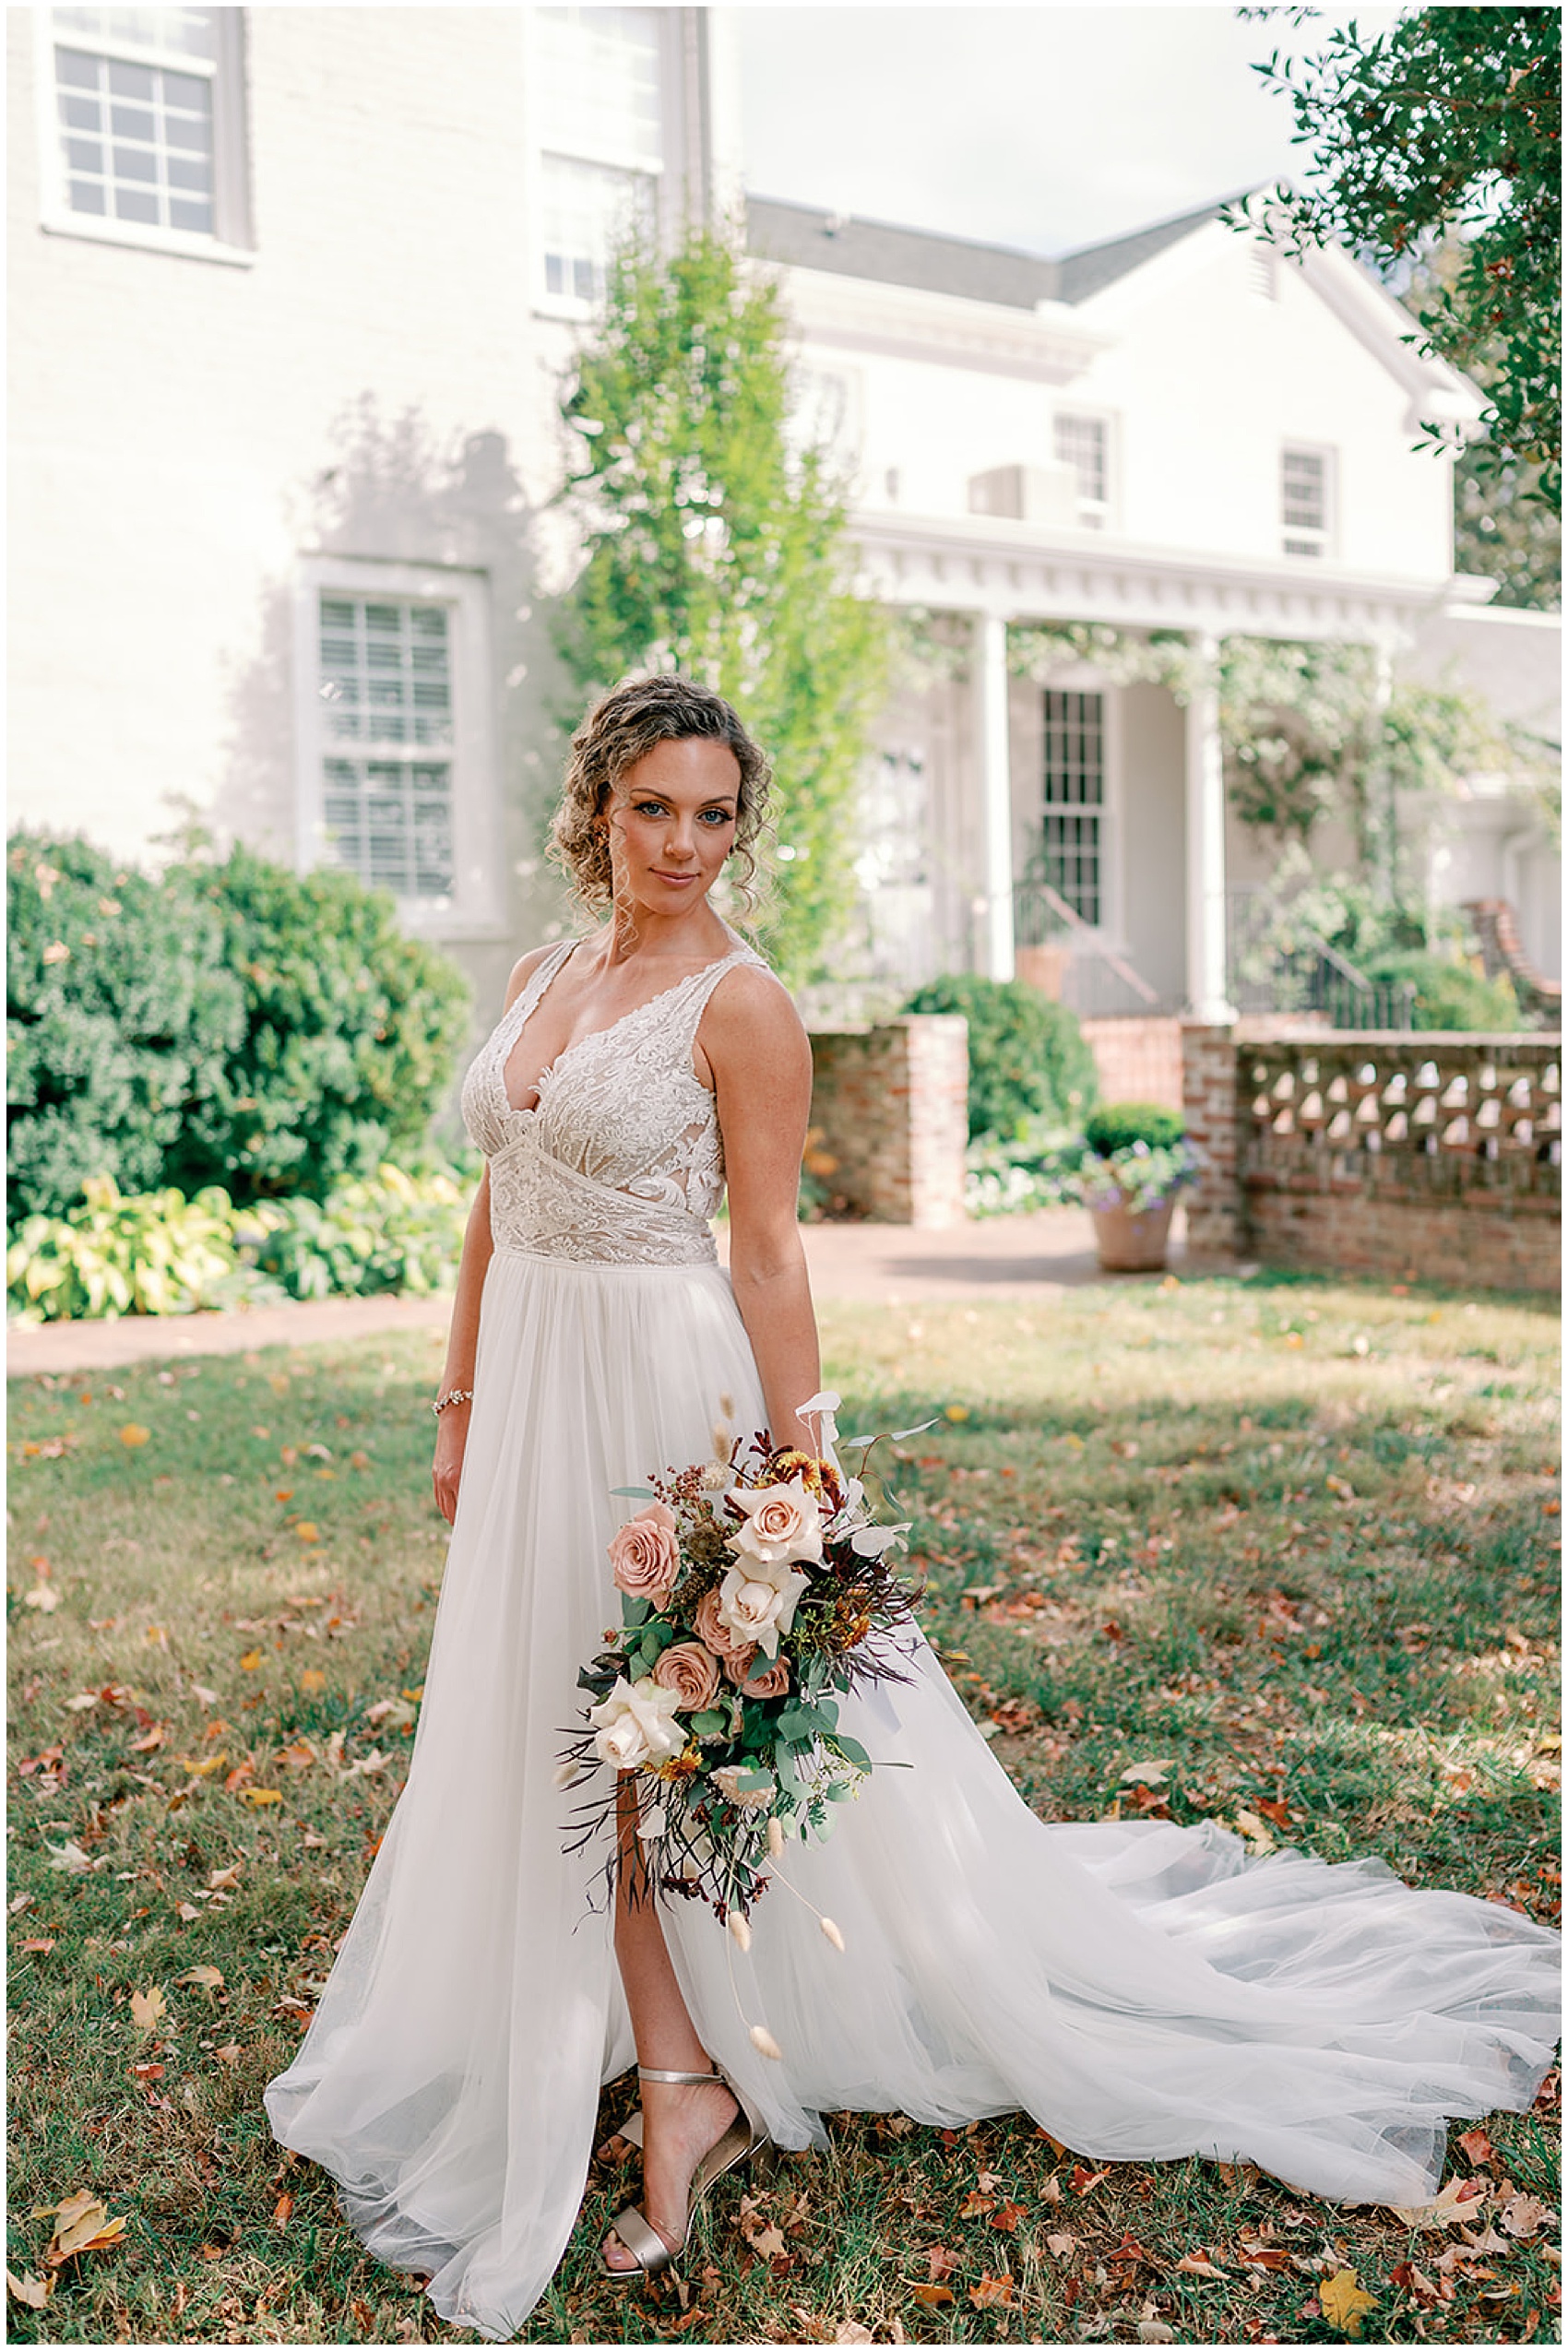 A bride stands in her lace top dress in the front garden of a wedding venue